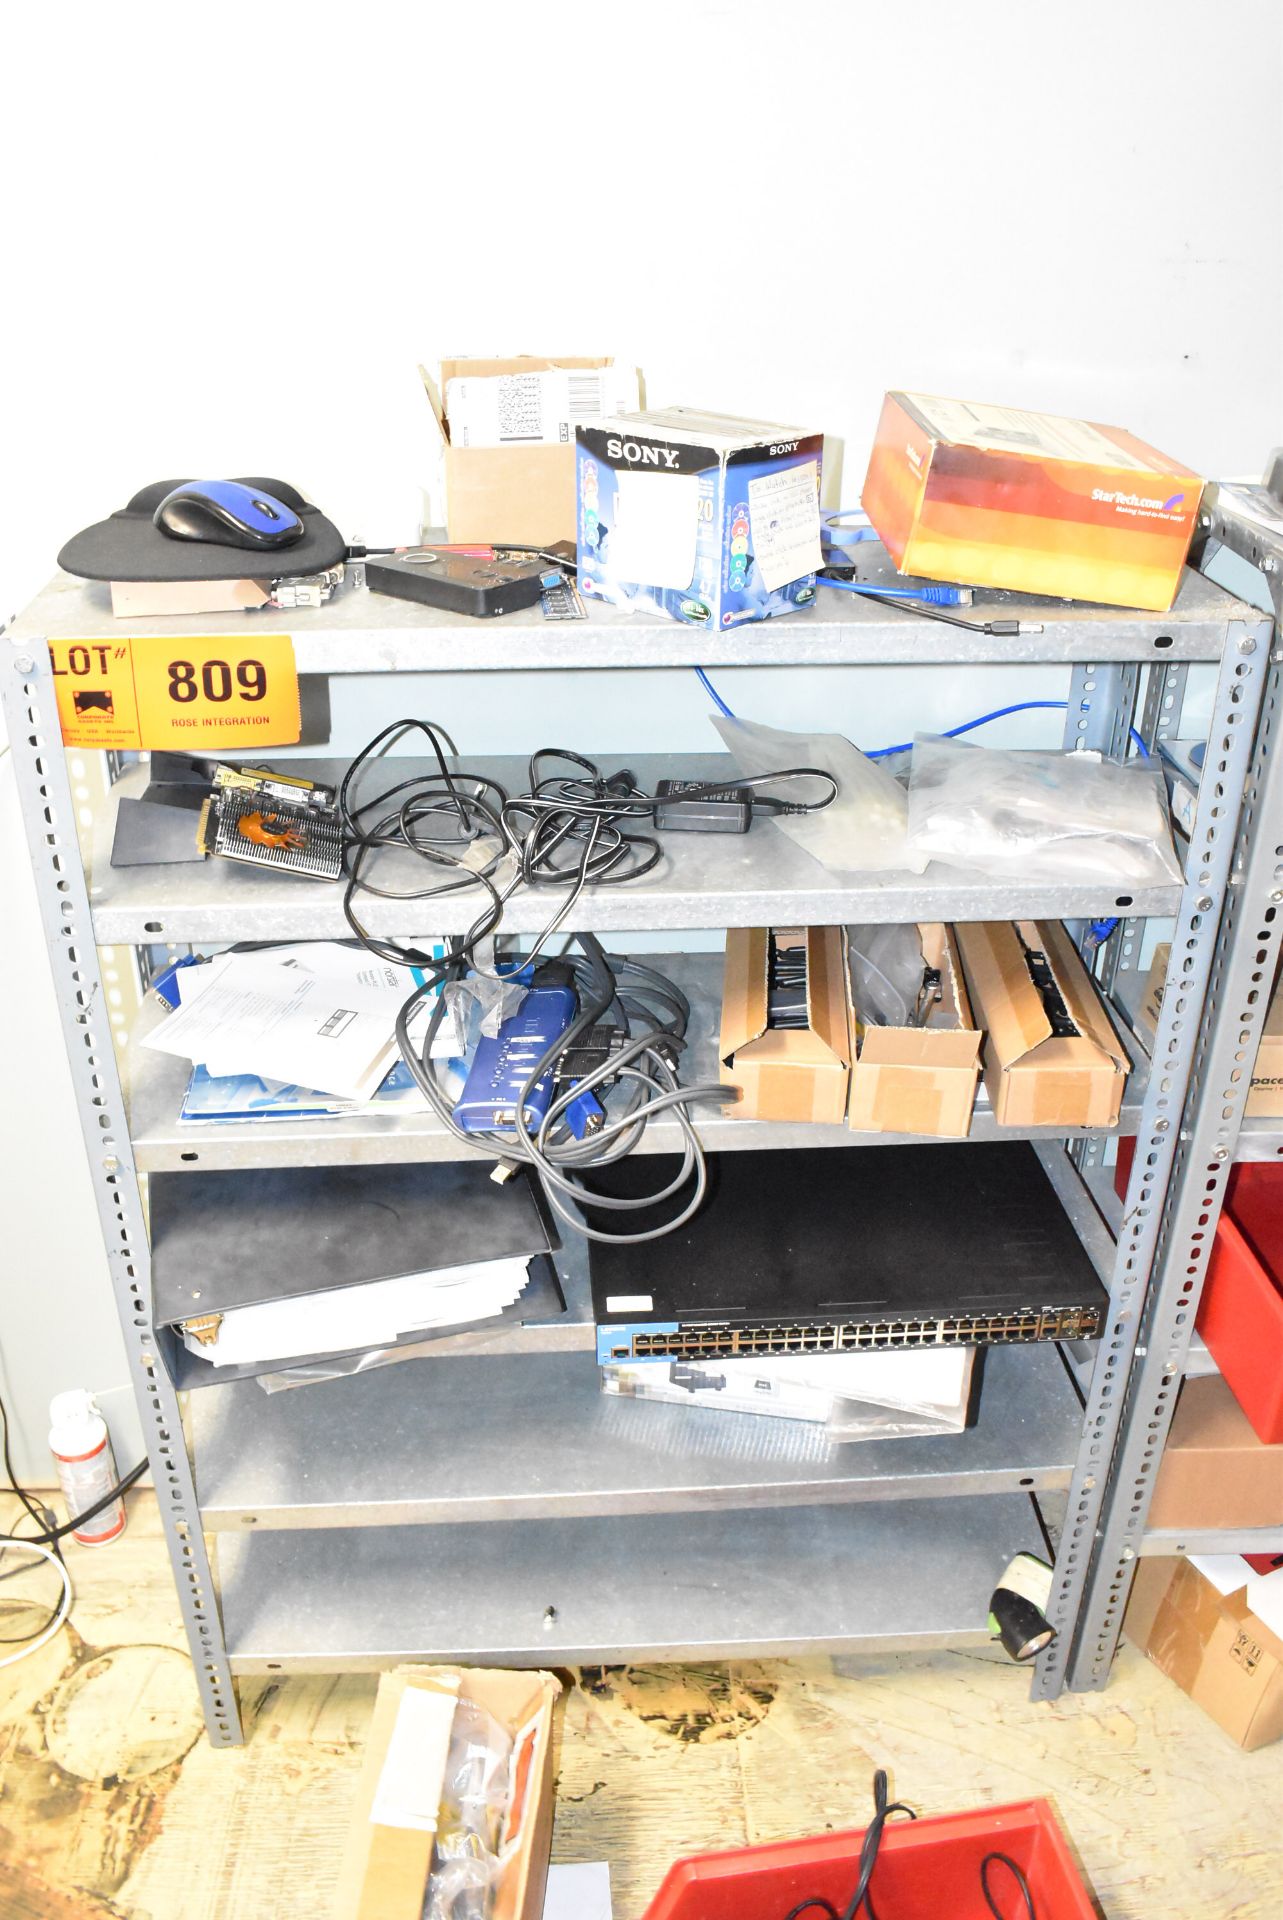 LOT/ SHELF WITH CONTENTS CONSISTING OF SANYO TV, COMPUTER CABLES & IT SUPPORT EQUIPMENT - Image 2 of 4